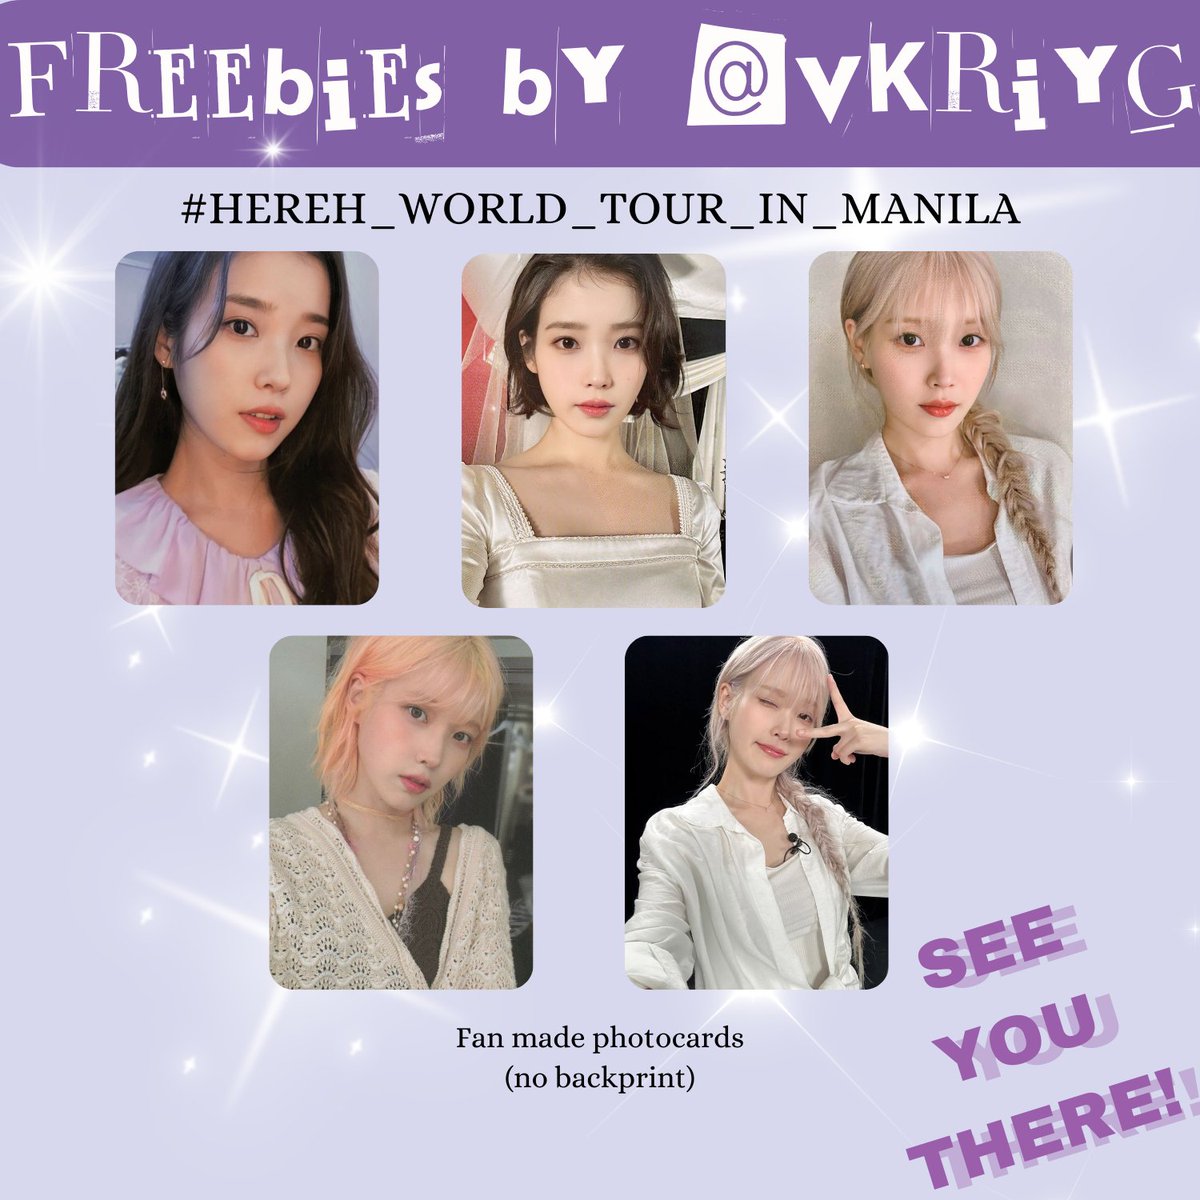 Freebies by @vkriyg for #HEREH_WORLD_TOUR_IN_MANILA !! 

— strictly 1:1 ratio
— like and rt
— dm me for trades!! <3 

Location: tba on D-DAY

See you, UAENAS! 

#IU #이지은 #아이유
#HEREH_WORLD_TOUR #IUinMANILA